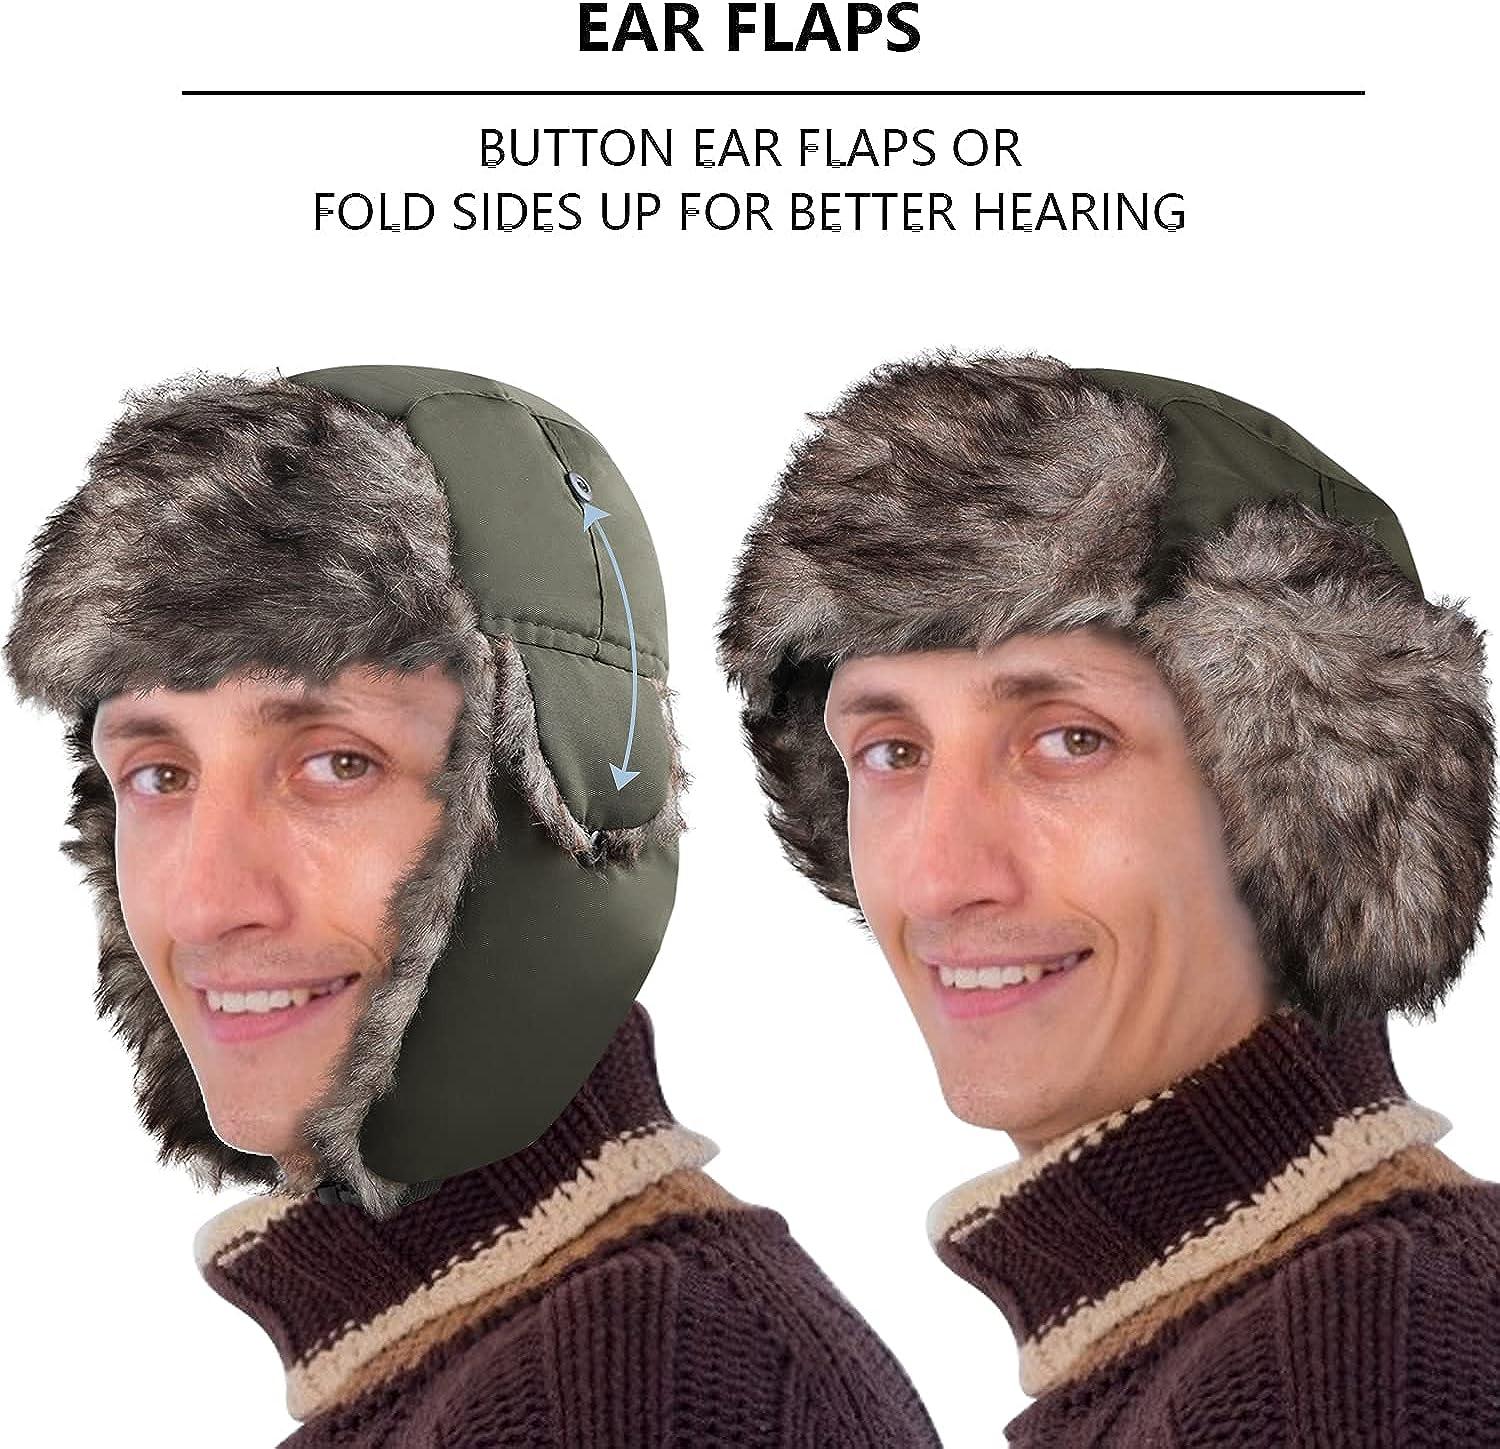 Buy Winter Trapper Hat - Russian Style Ushanka, Trooper, Faux Fur Headwear  for Men and Women - Ear Flaps, Chin Strap, Windproof Ski Mask - Covers Full  Face - Hunting, Snowboarding Accessories